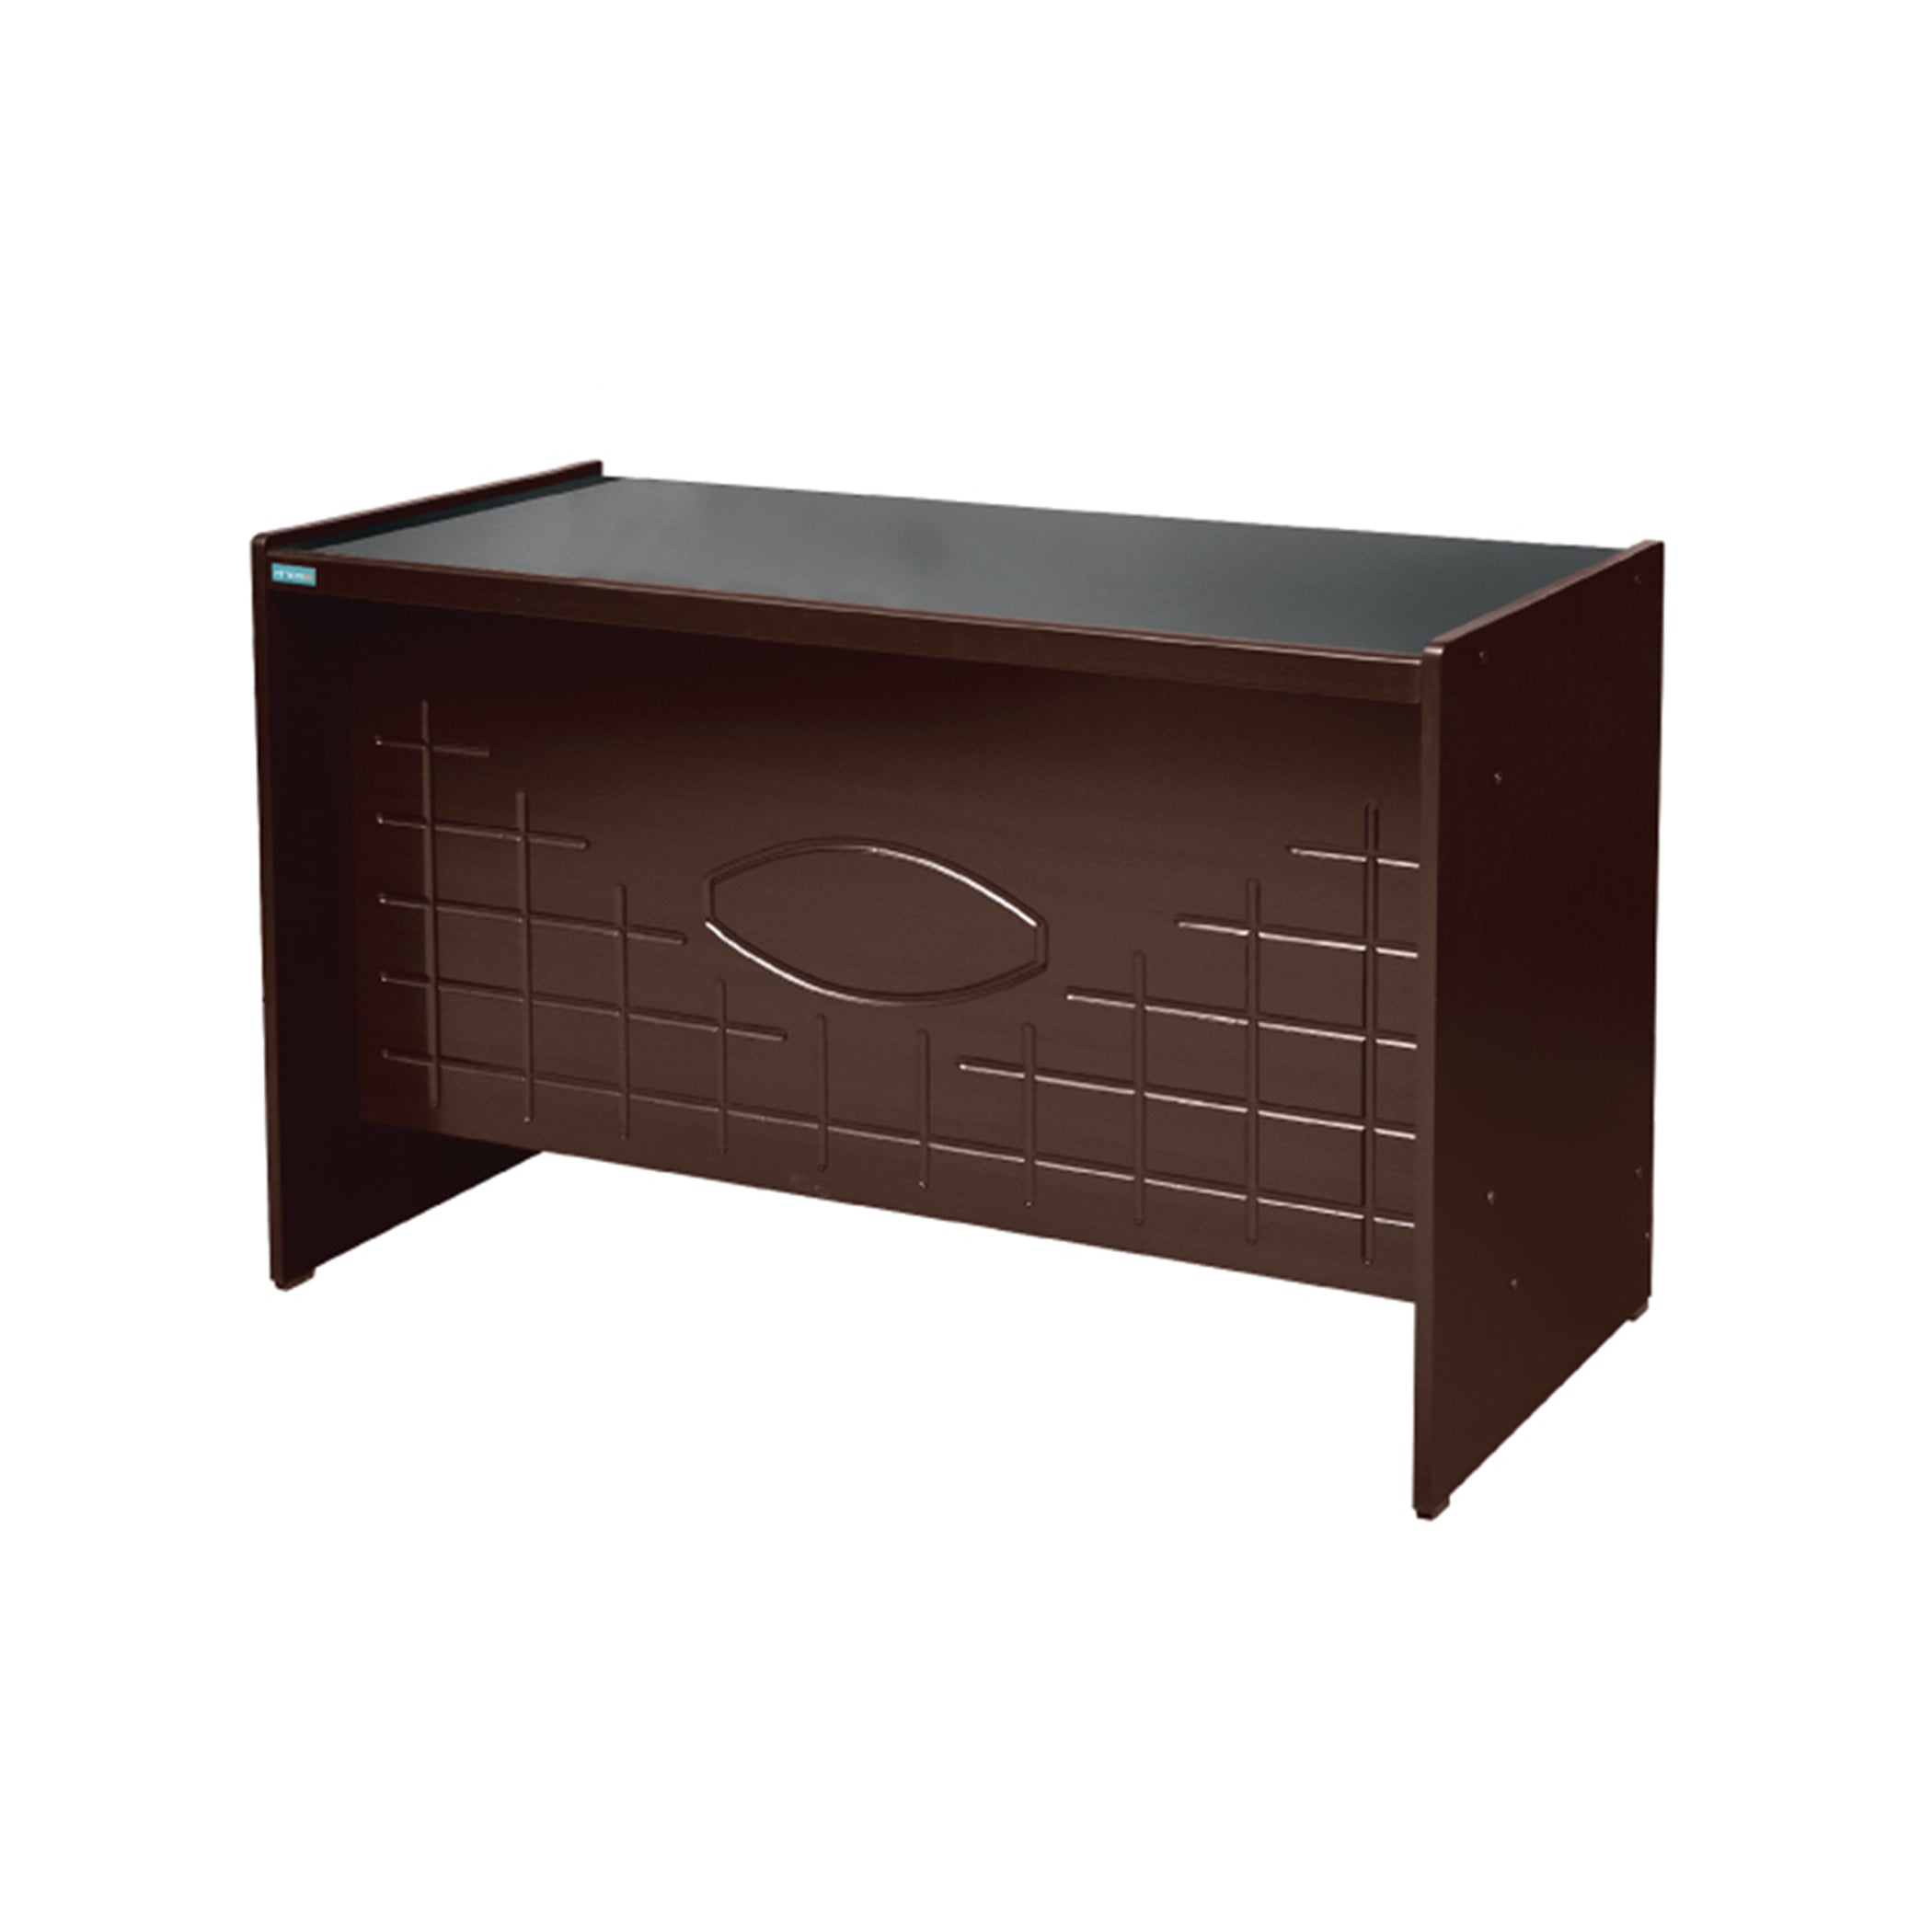 Spark4824 Office Study Table by Zorin in Walnut Finish Zorin